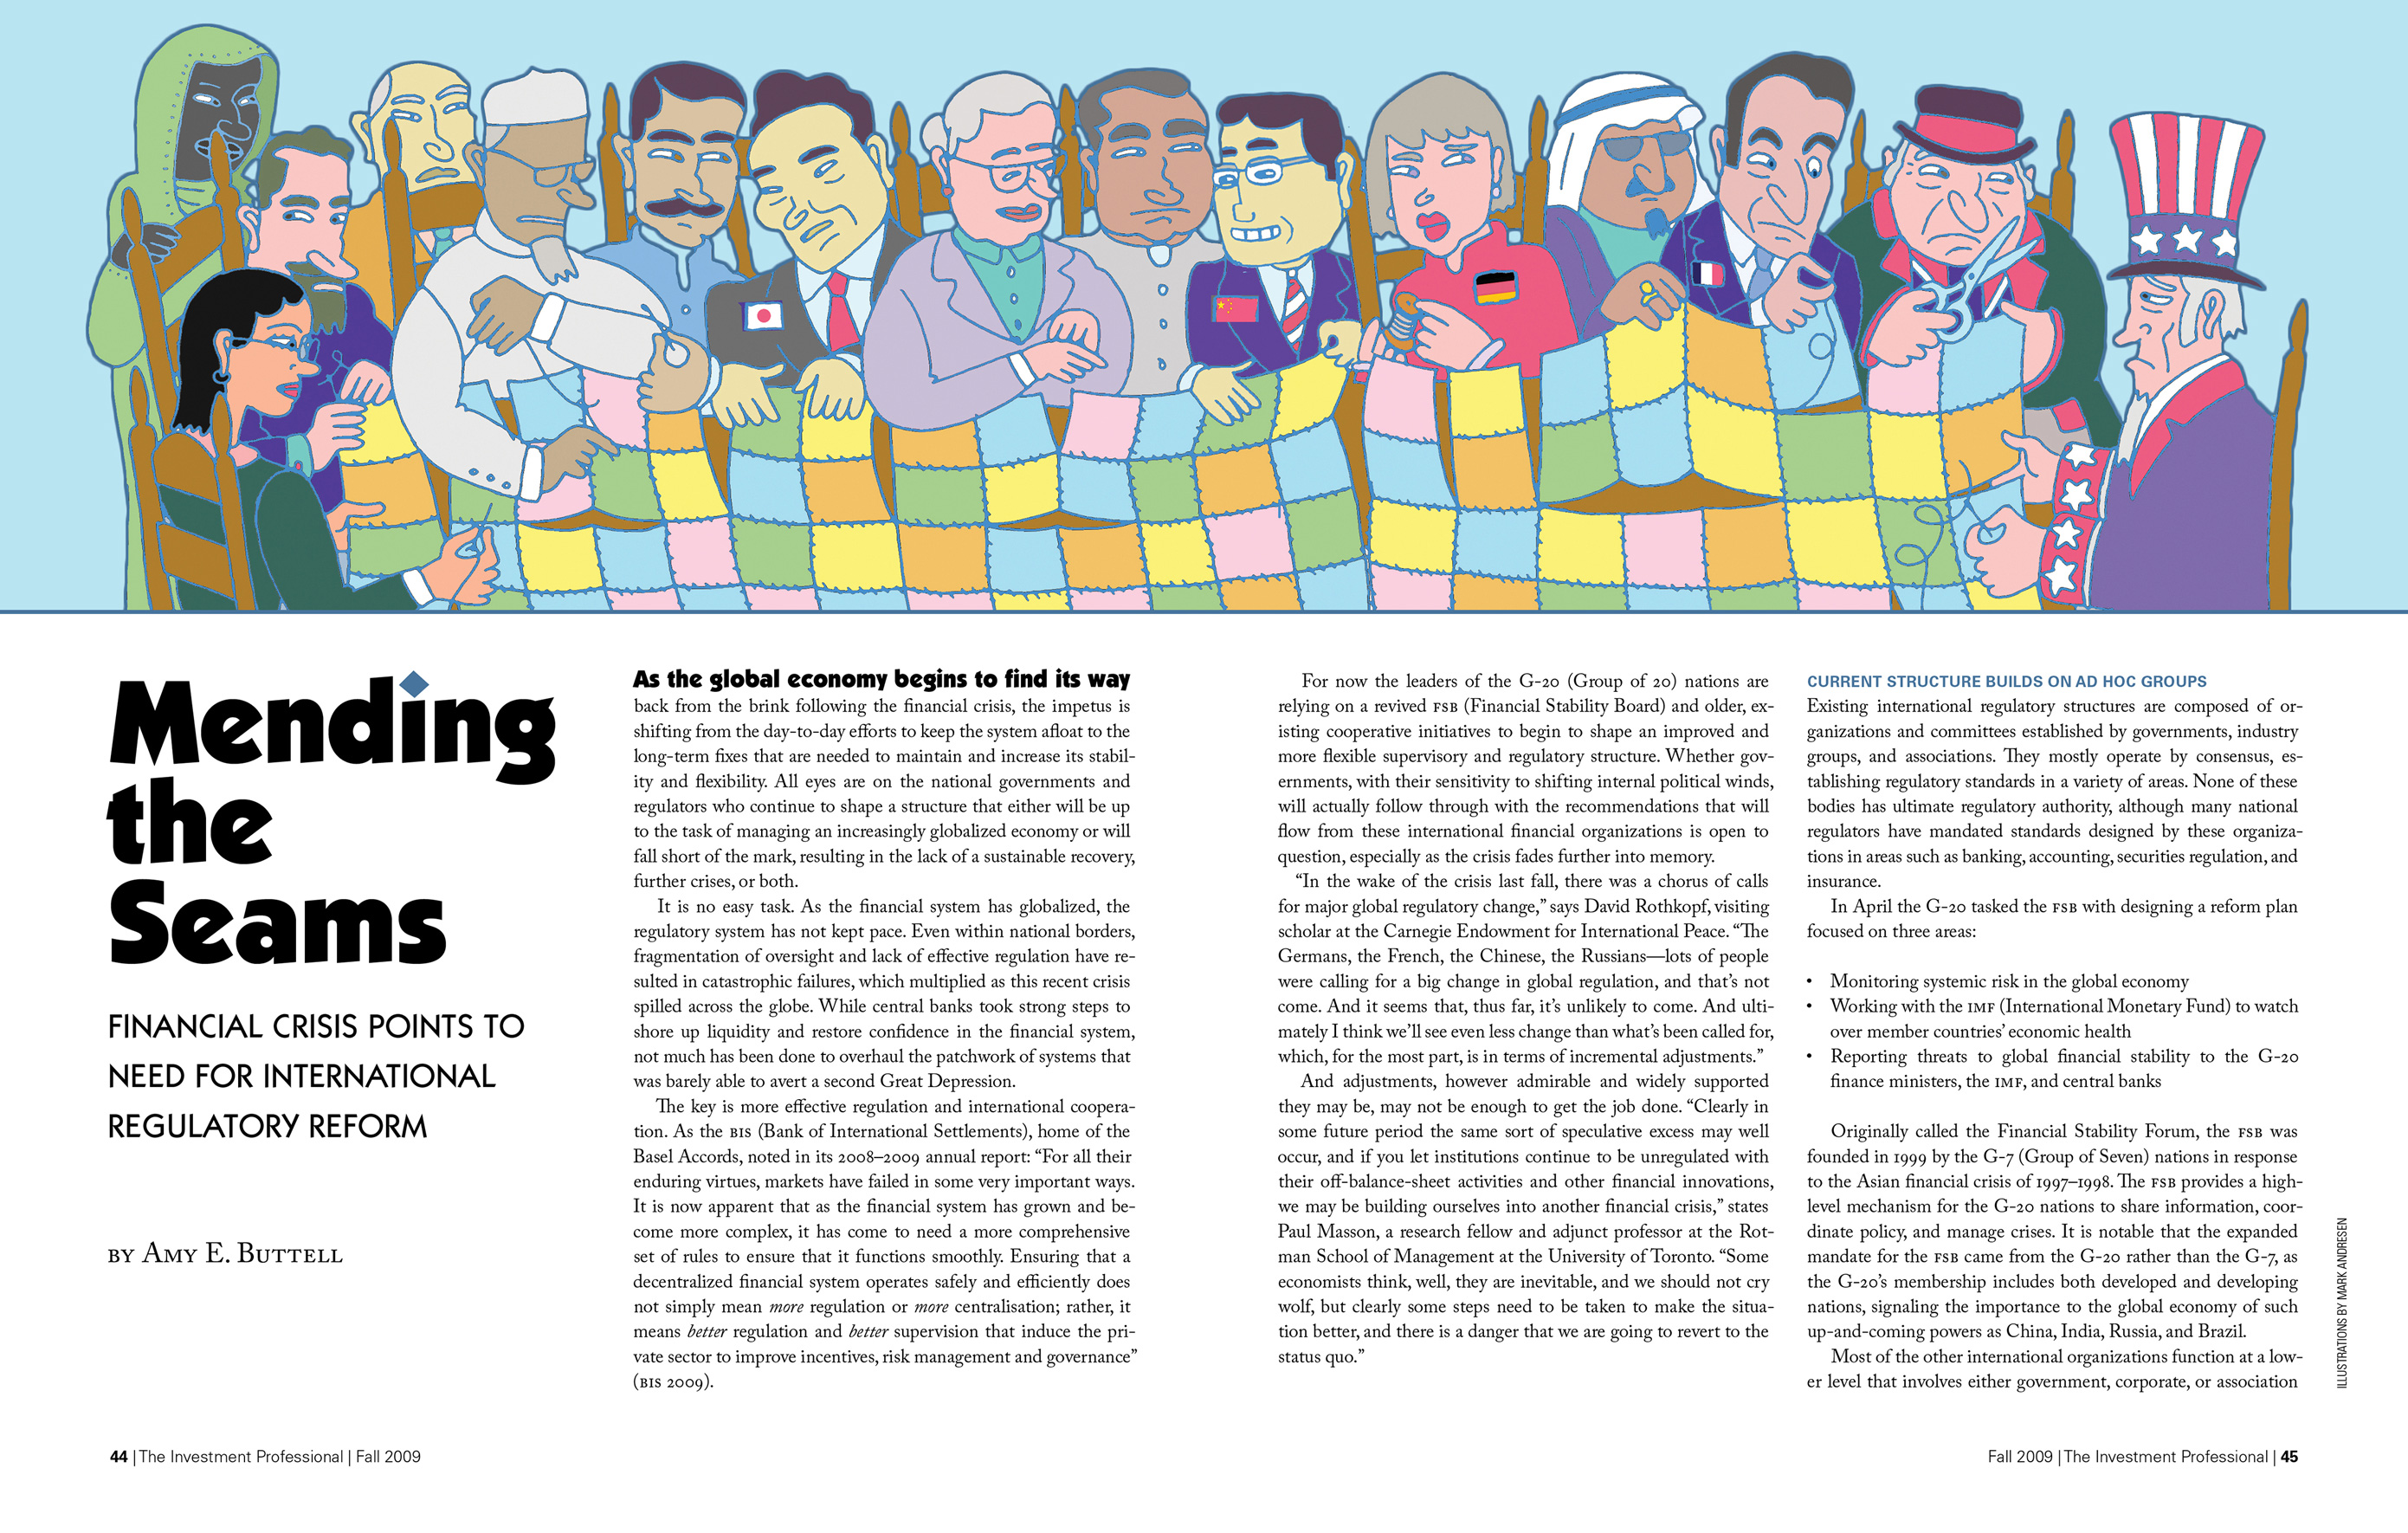 Opening spread of a feature article in The Investment Professional magazine, titled 'Mending the Seams: Financial Crisis Points to Need for International Regulatory Reform.' An illustration spans the top half of the spread, showing heads of state at a quilting session.